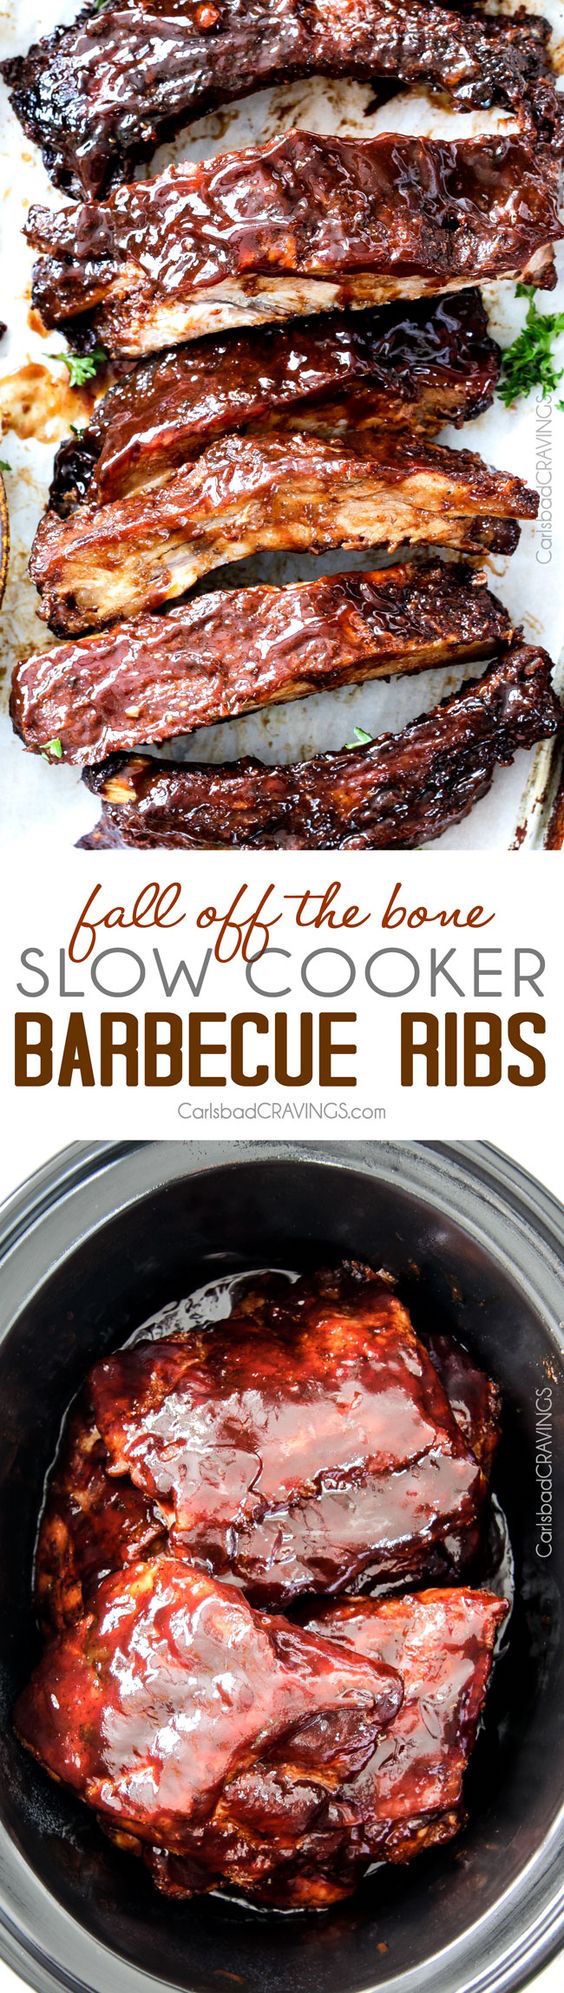 15 minute prep Fall-Off-the-Bone Slow Cooker Barbecue Ribs that everyone goes crazy for! They are slathered in the most incredible rub and barbecue sauce for amazing restaurant flavor. They are better and more tender than any restaurant! 